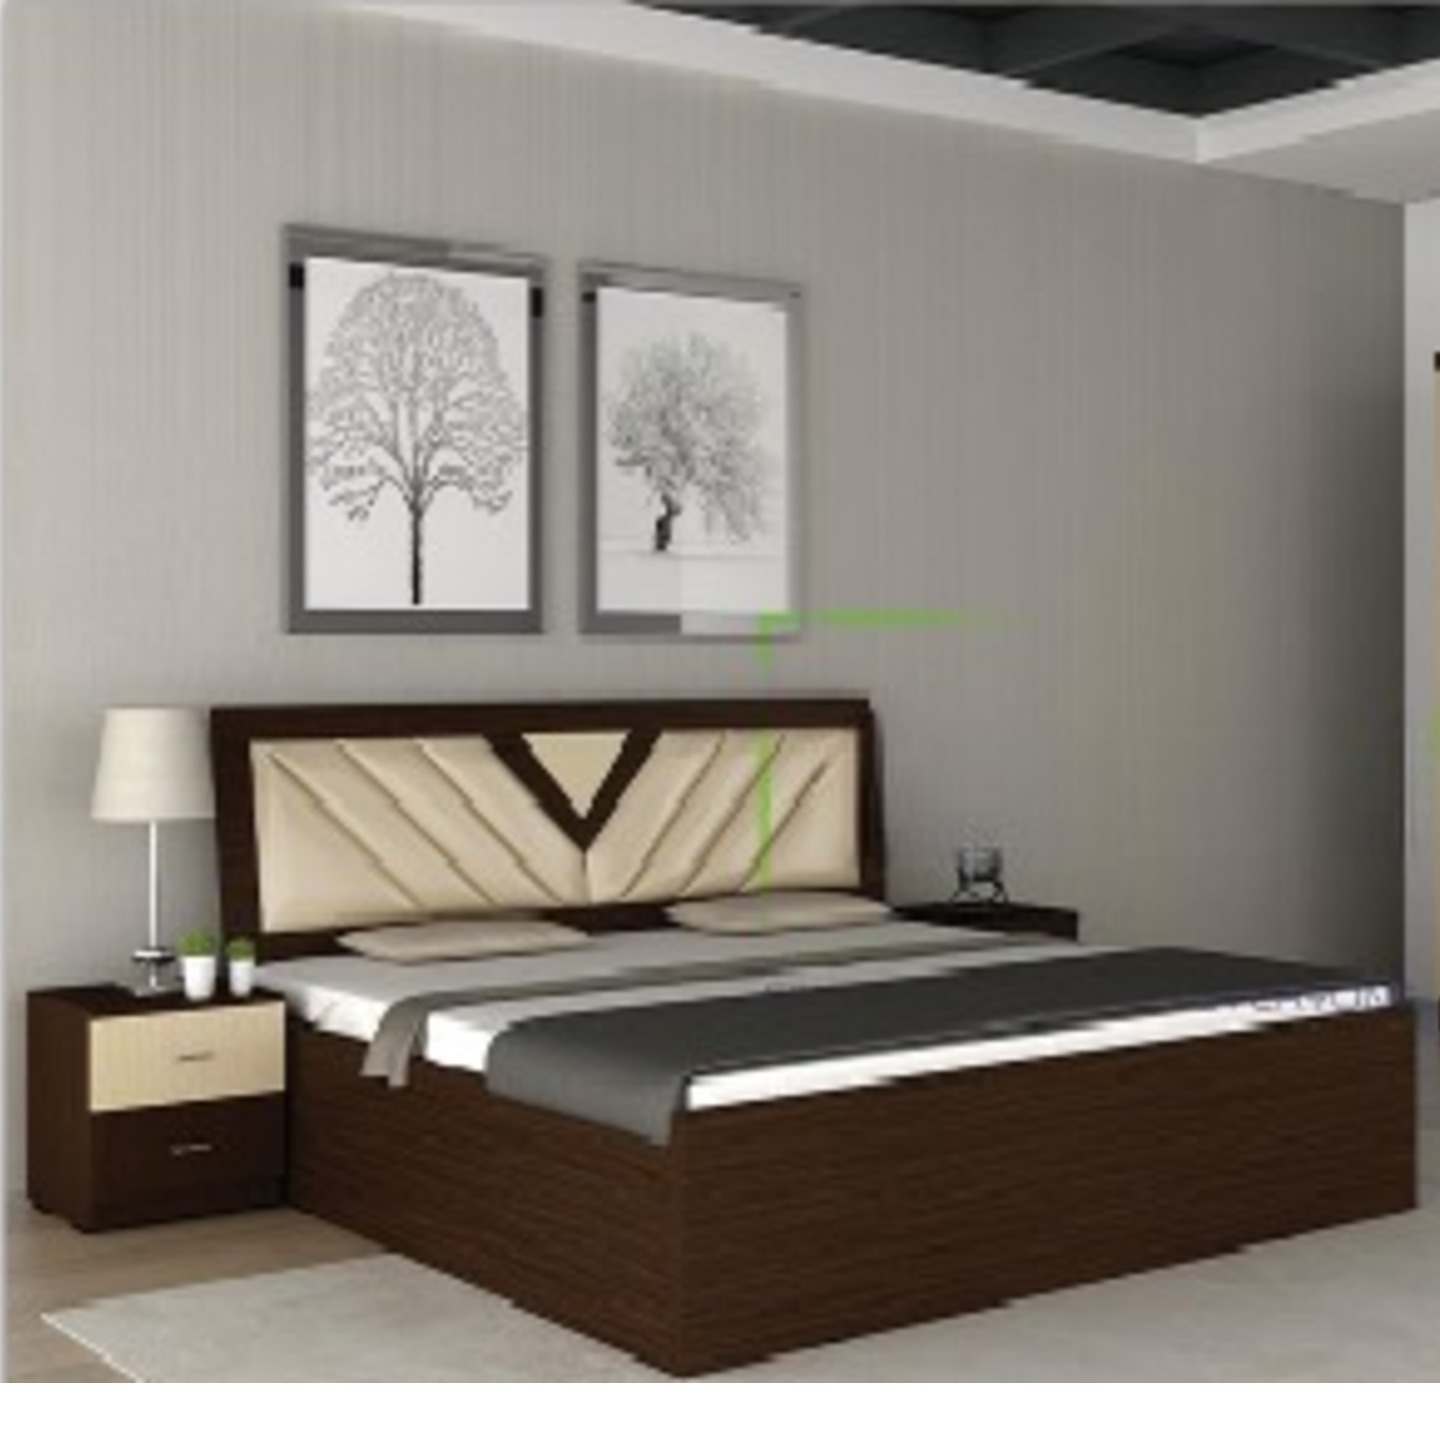 CFA Queen Size Bed With Manual Vega In Brown Colour